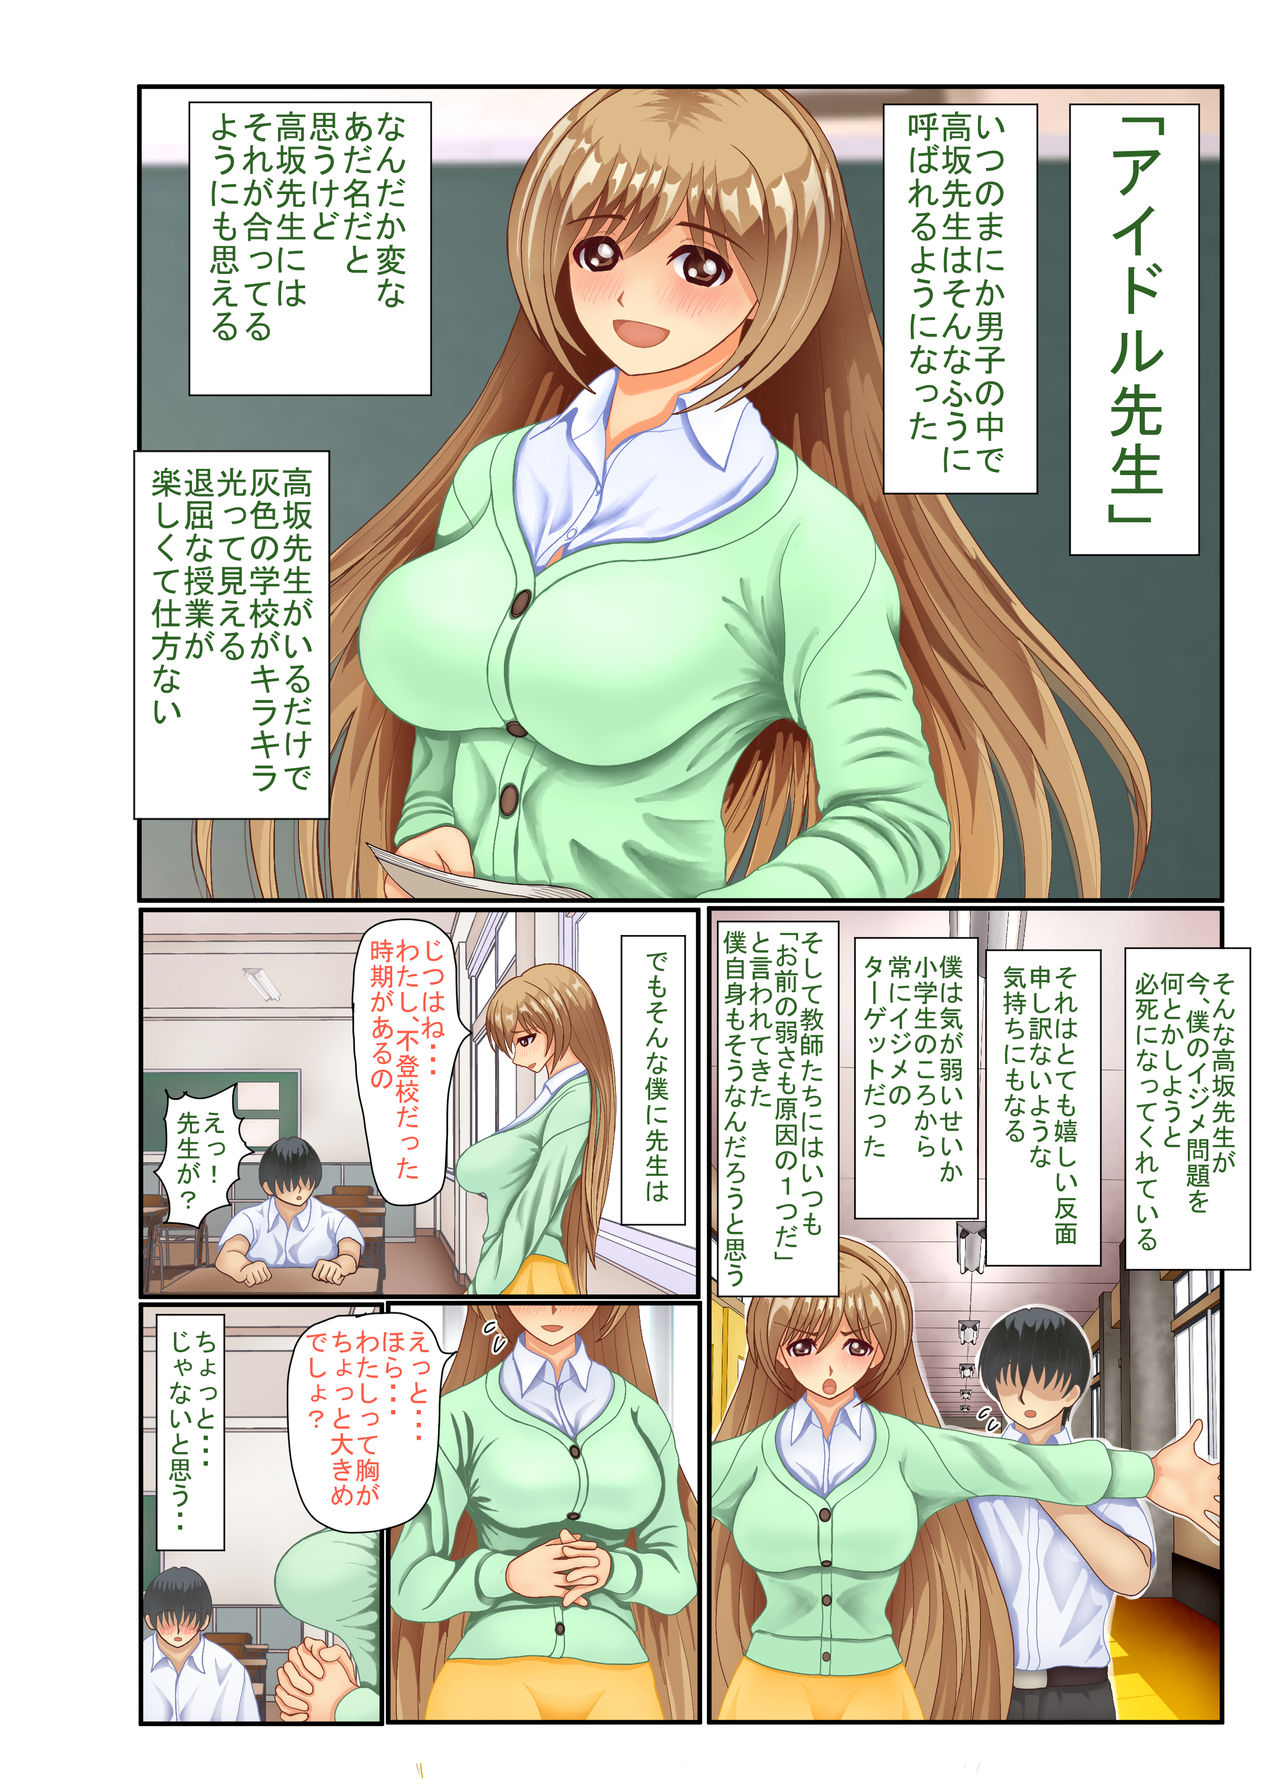 [KumakuraMizu] Violated Teacher - My Teacher & First Love Tricked, Snatched and Depraved by Delinquents page 4 full